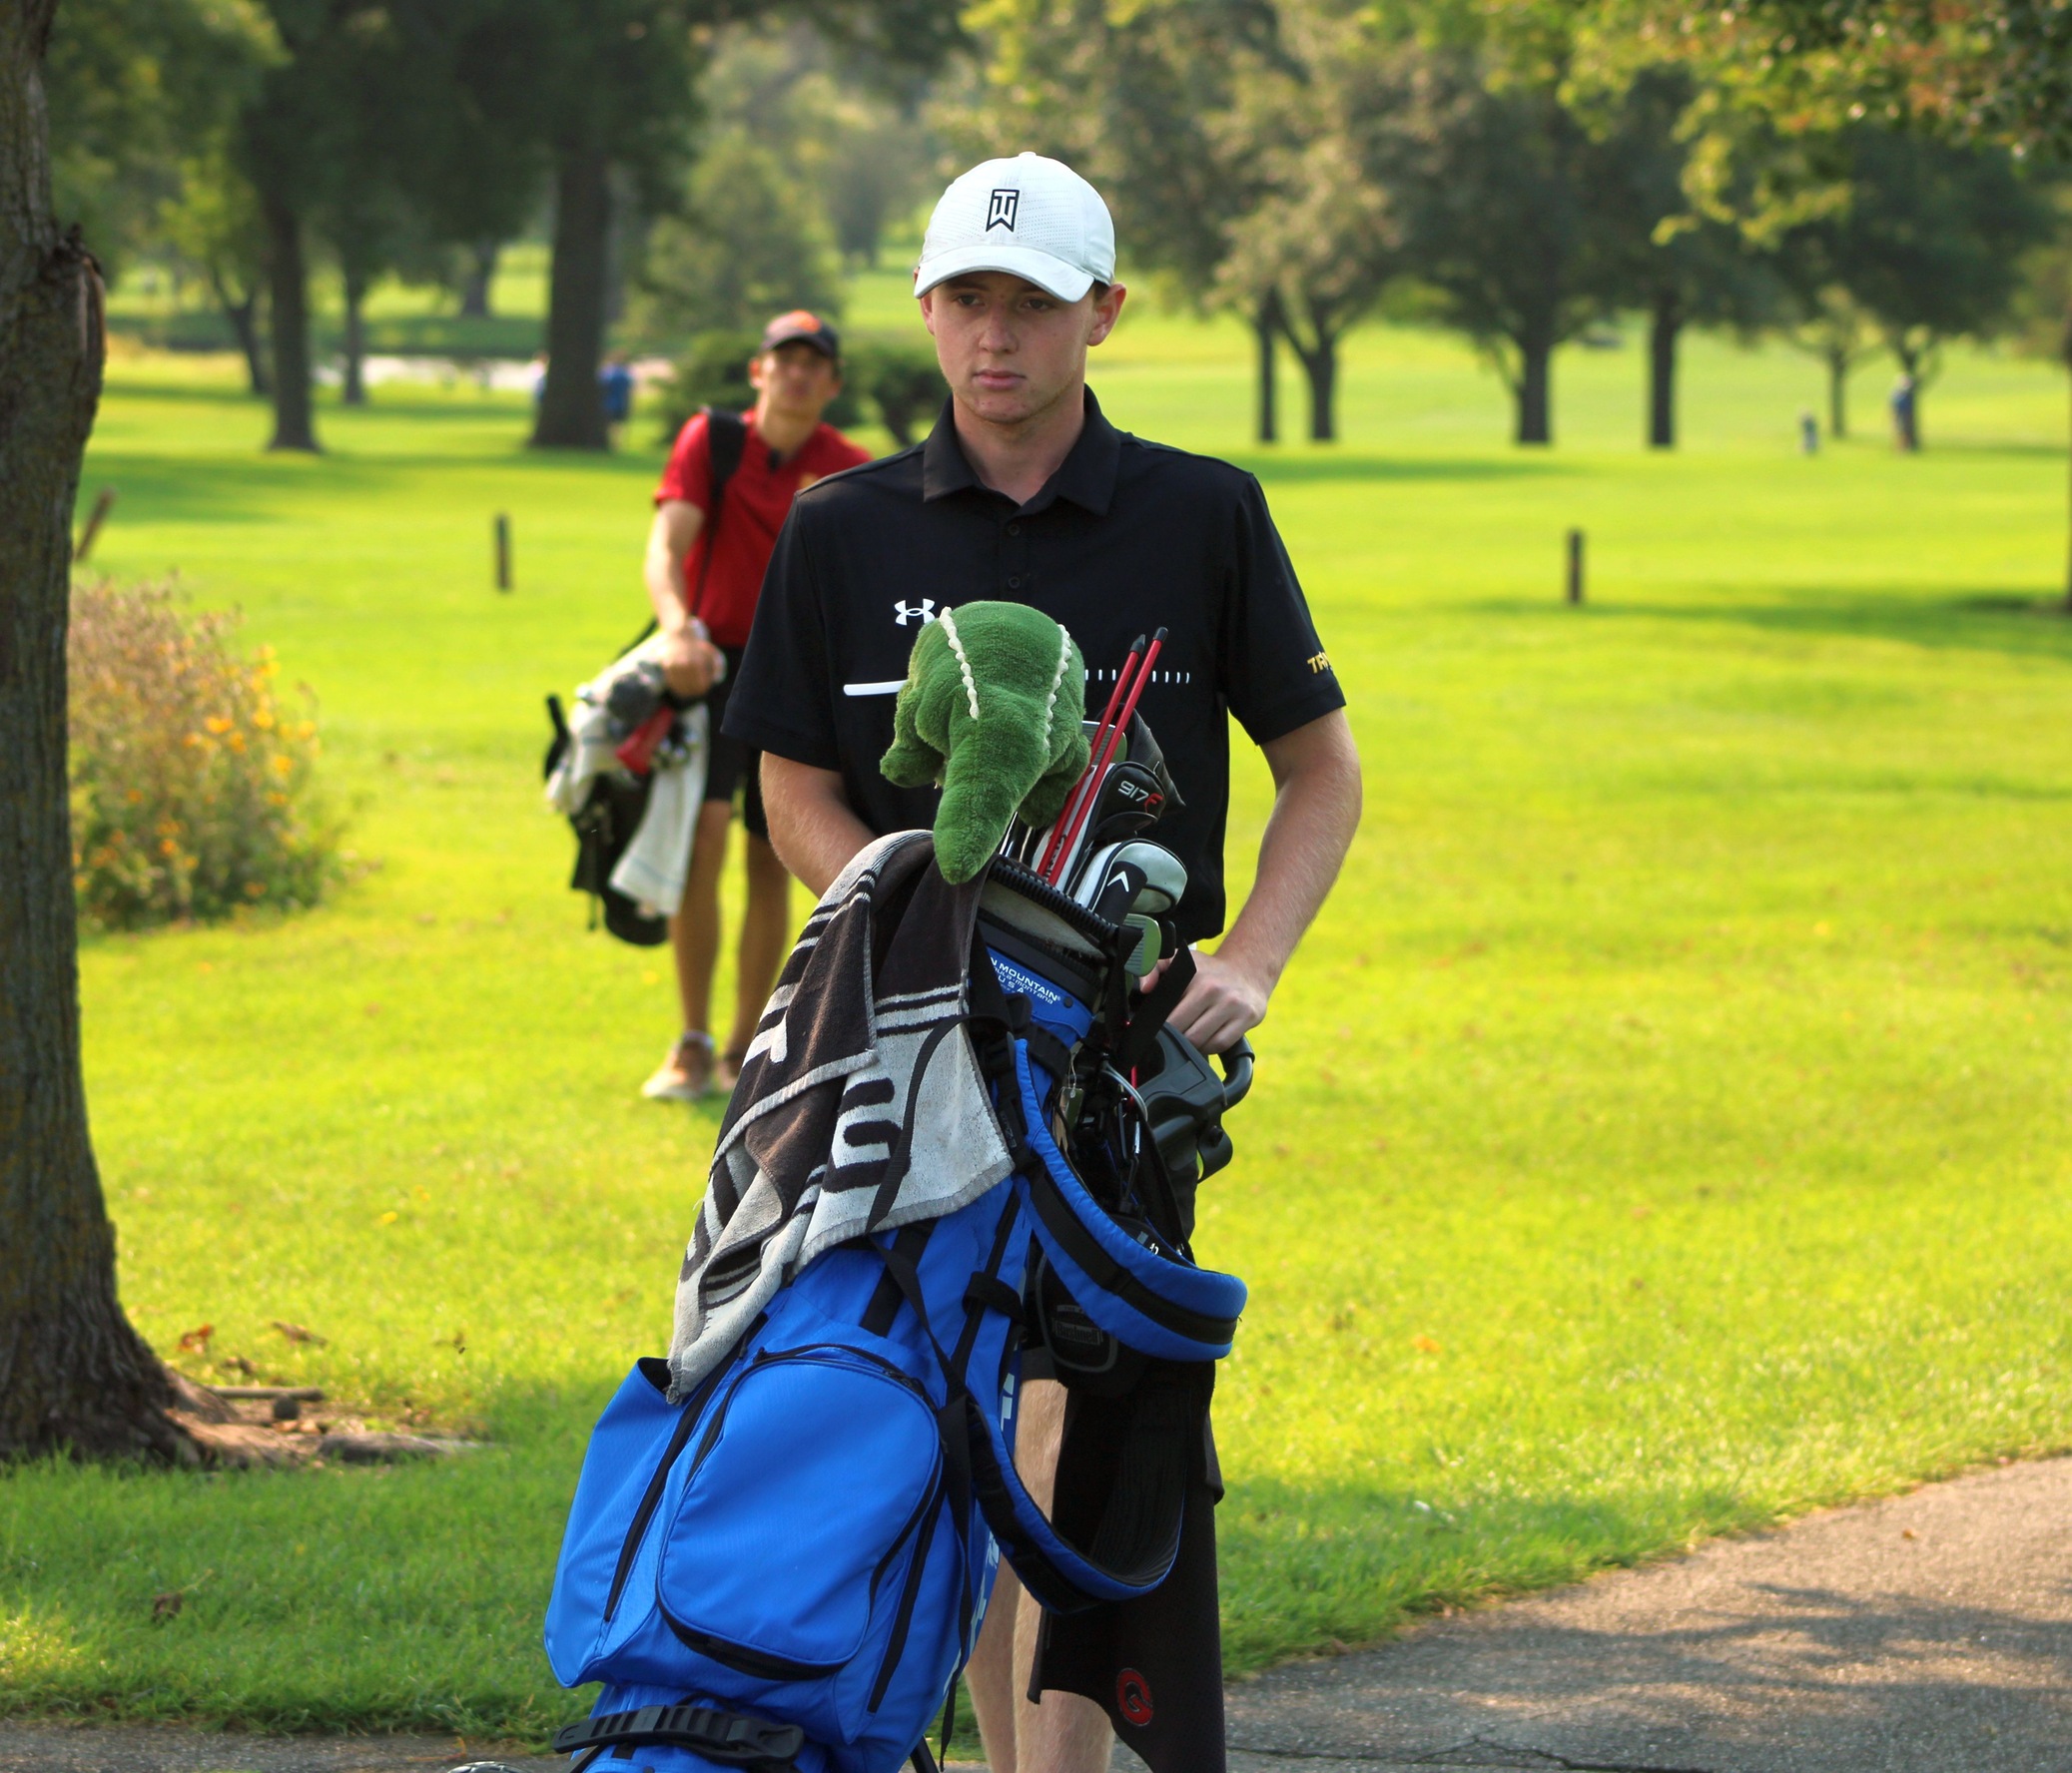 NIACC's Bryce Malchow was selected as the ICCAC Division II men's golfer of the week for the week of Sept. 12-18.